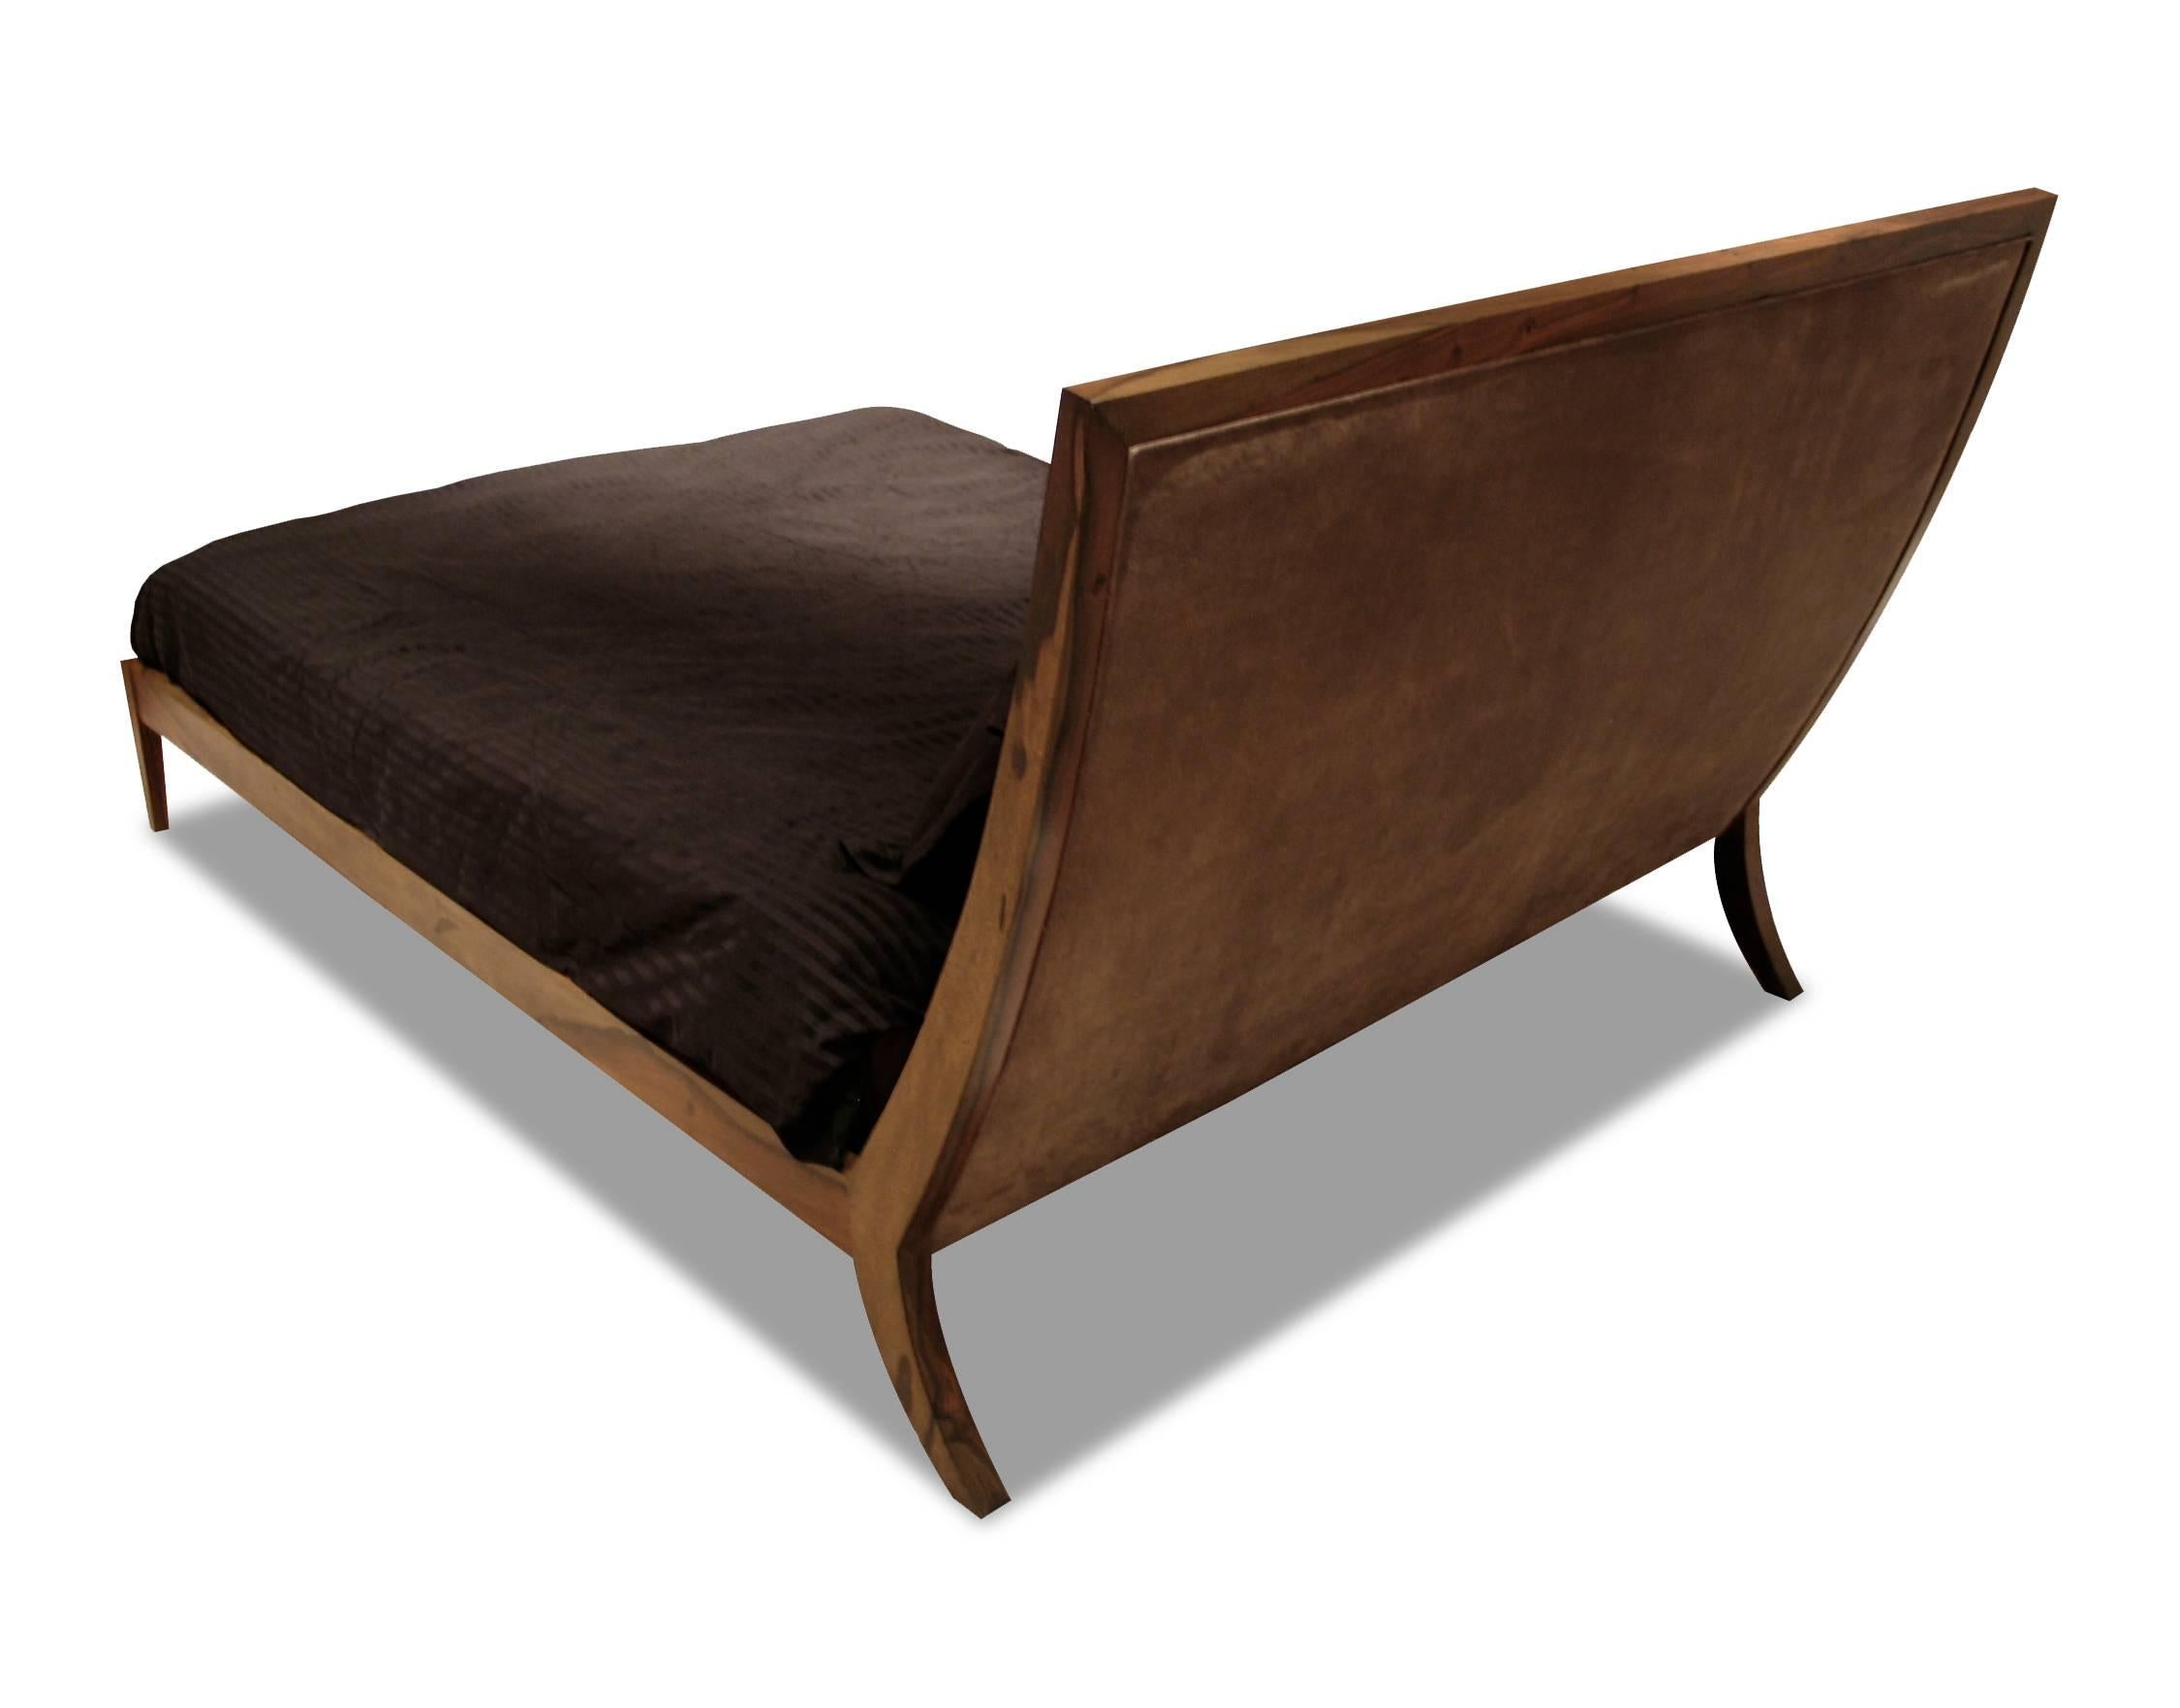 The Belgrano bed from Costantini is handmade using solid wood (shown in Argentine rosewood) and an upholstered headboard, shown in leather, but available in any fabric, leather or COM/COL.

It features an ergonomic headboard that eliminates the